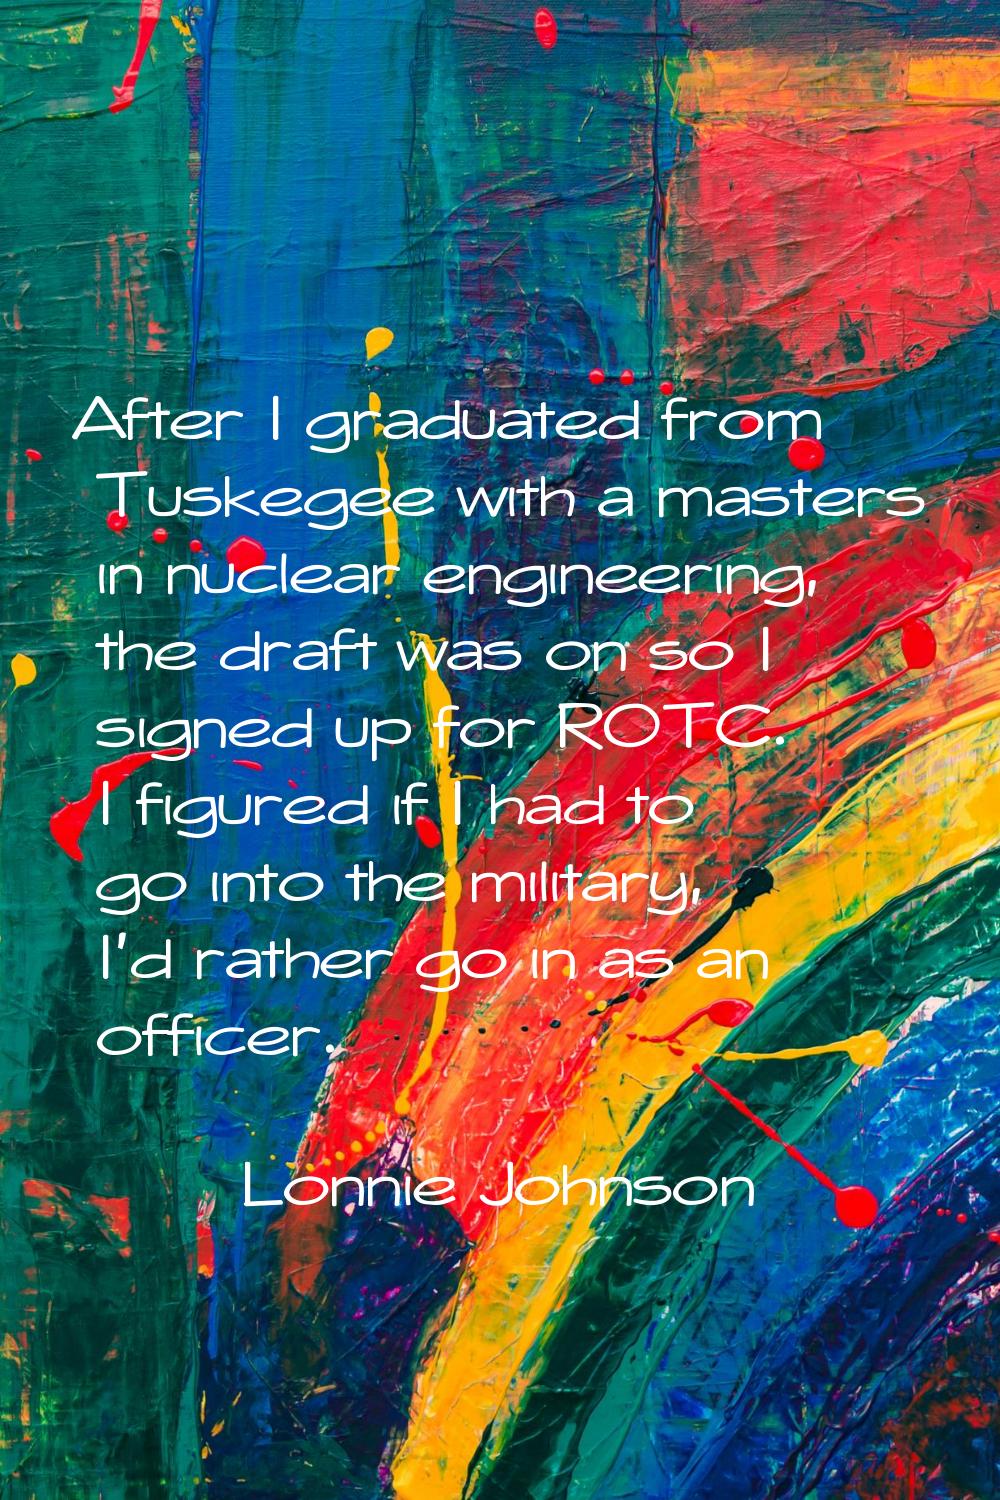 After I graduated from Tuskegee with a masters in nuclear engineering, the draft was on so I signed